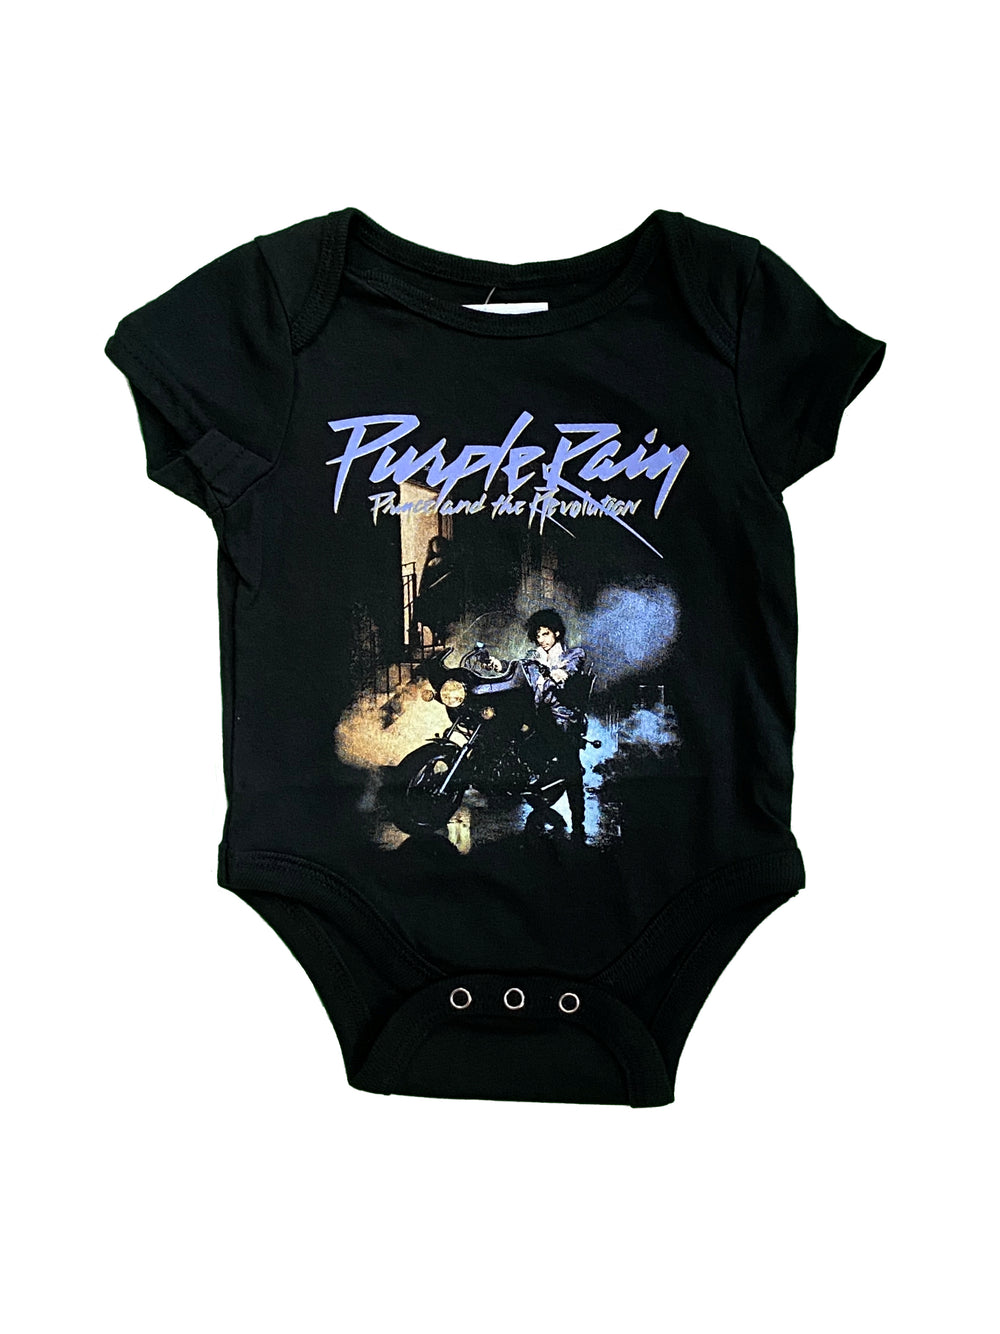 Prince – Purple Rain Official Merchandise Baby grow Various Sizes NEW